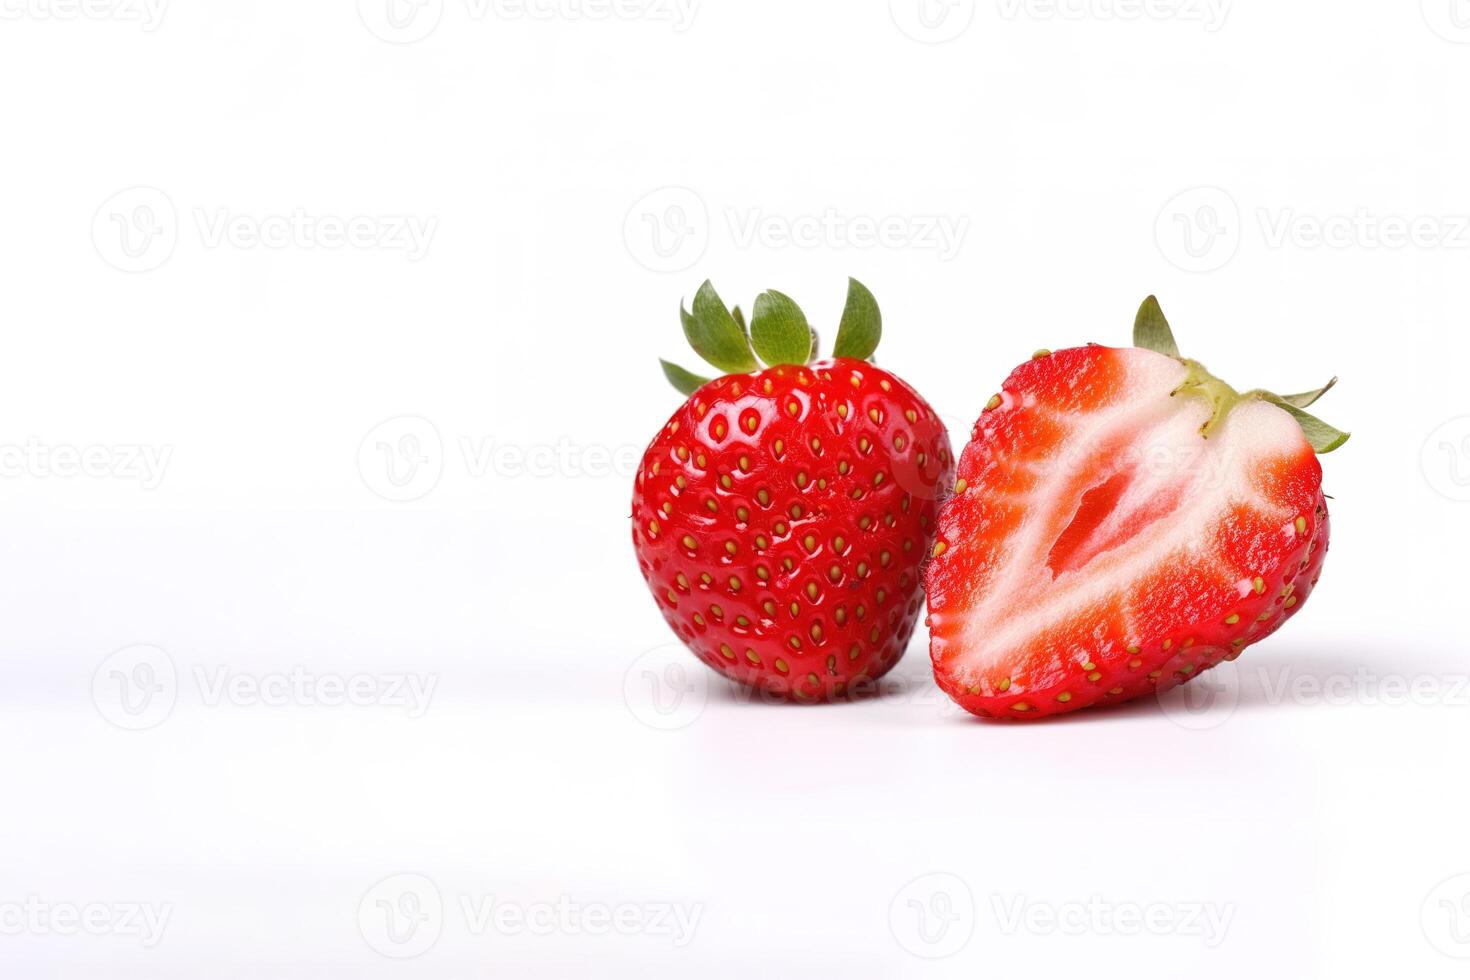 Fresh whole and sliced strawberries isolated on white background with copy space. photo